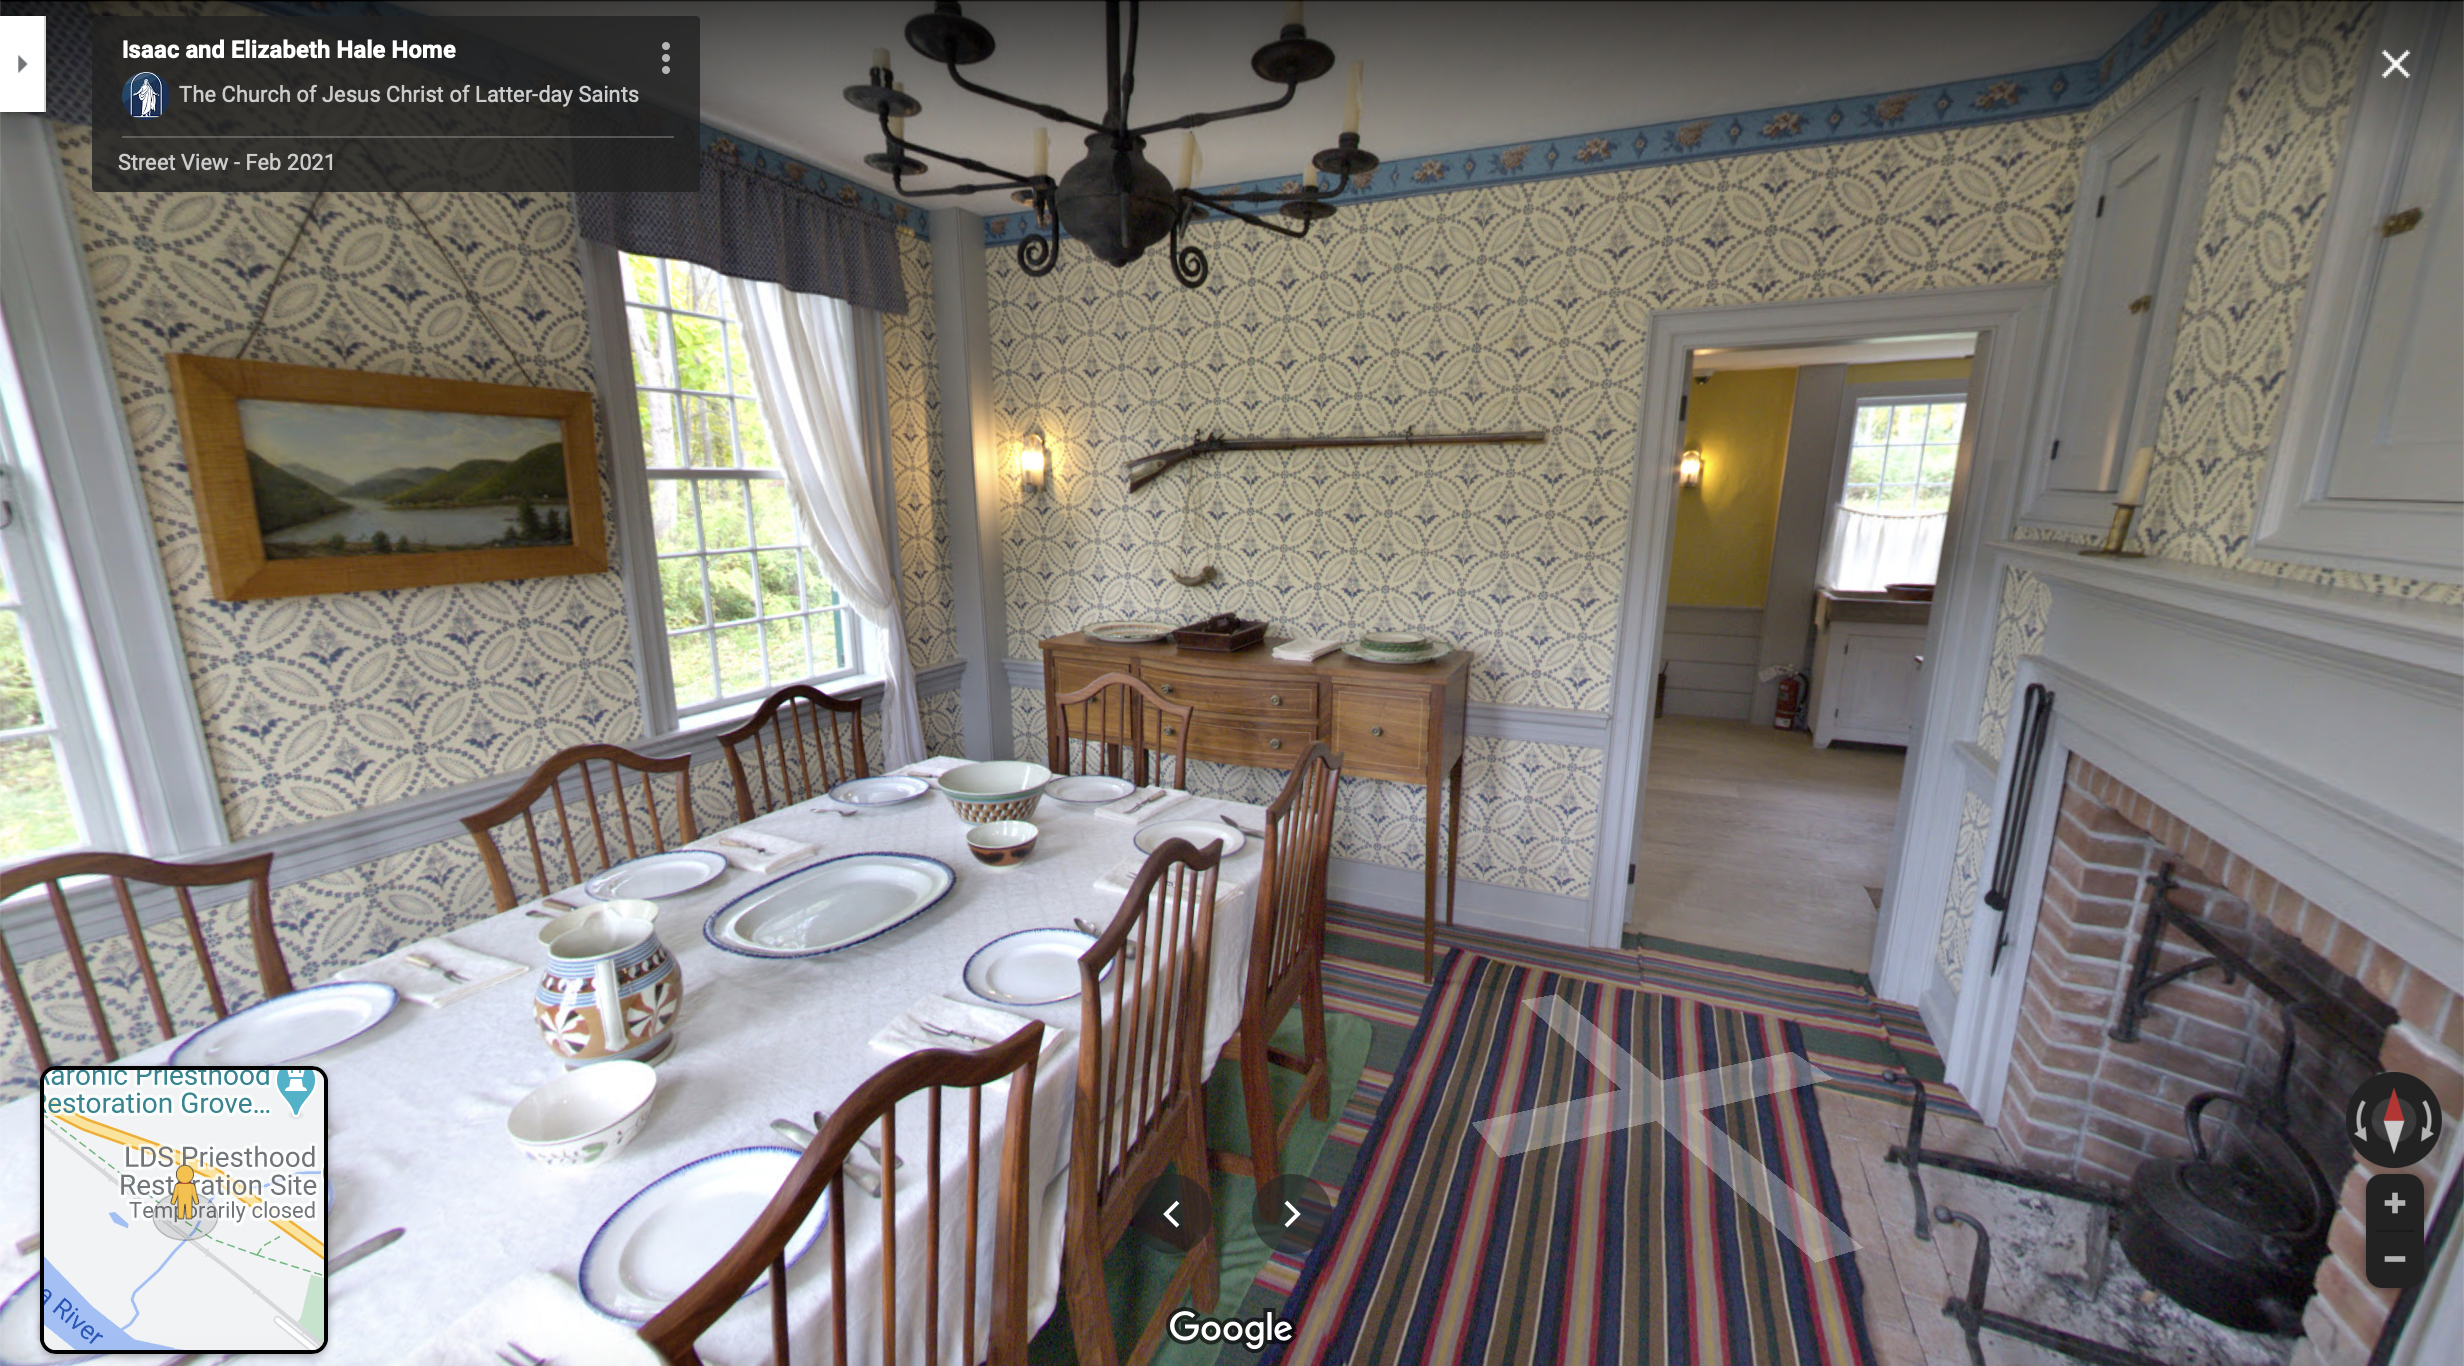 Screenshot of the Google Maps 360 view of Isaac Hale Home